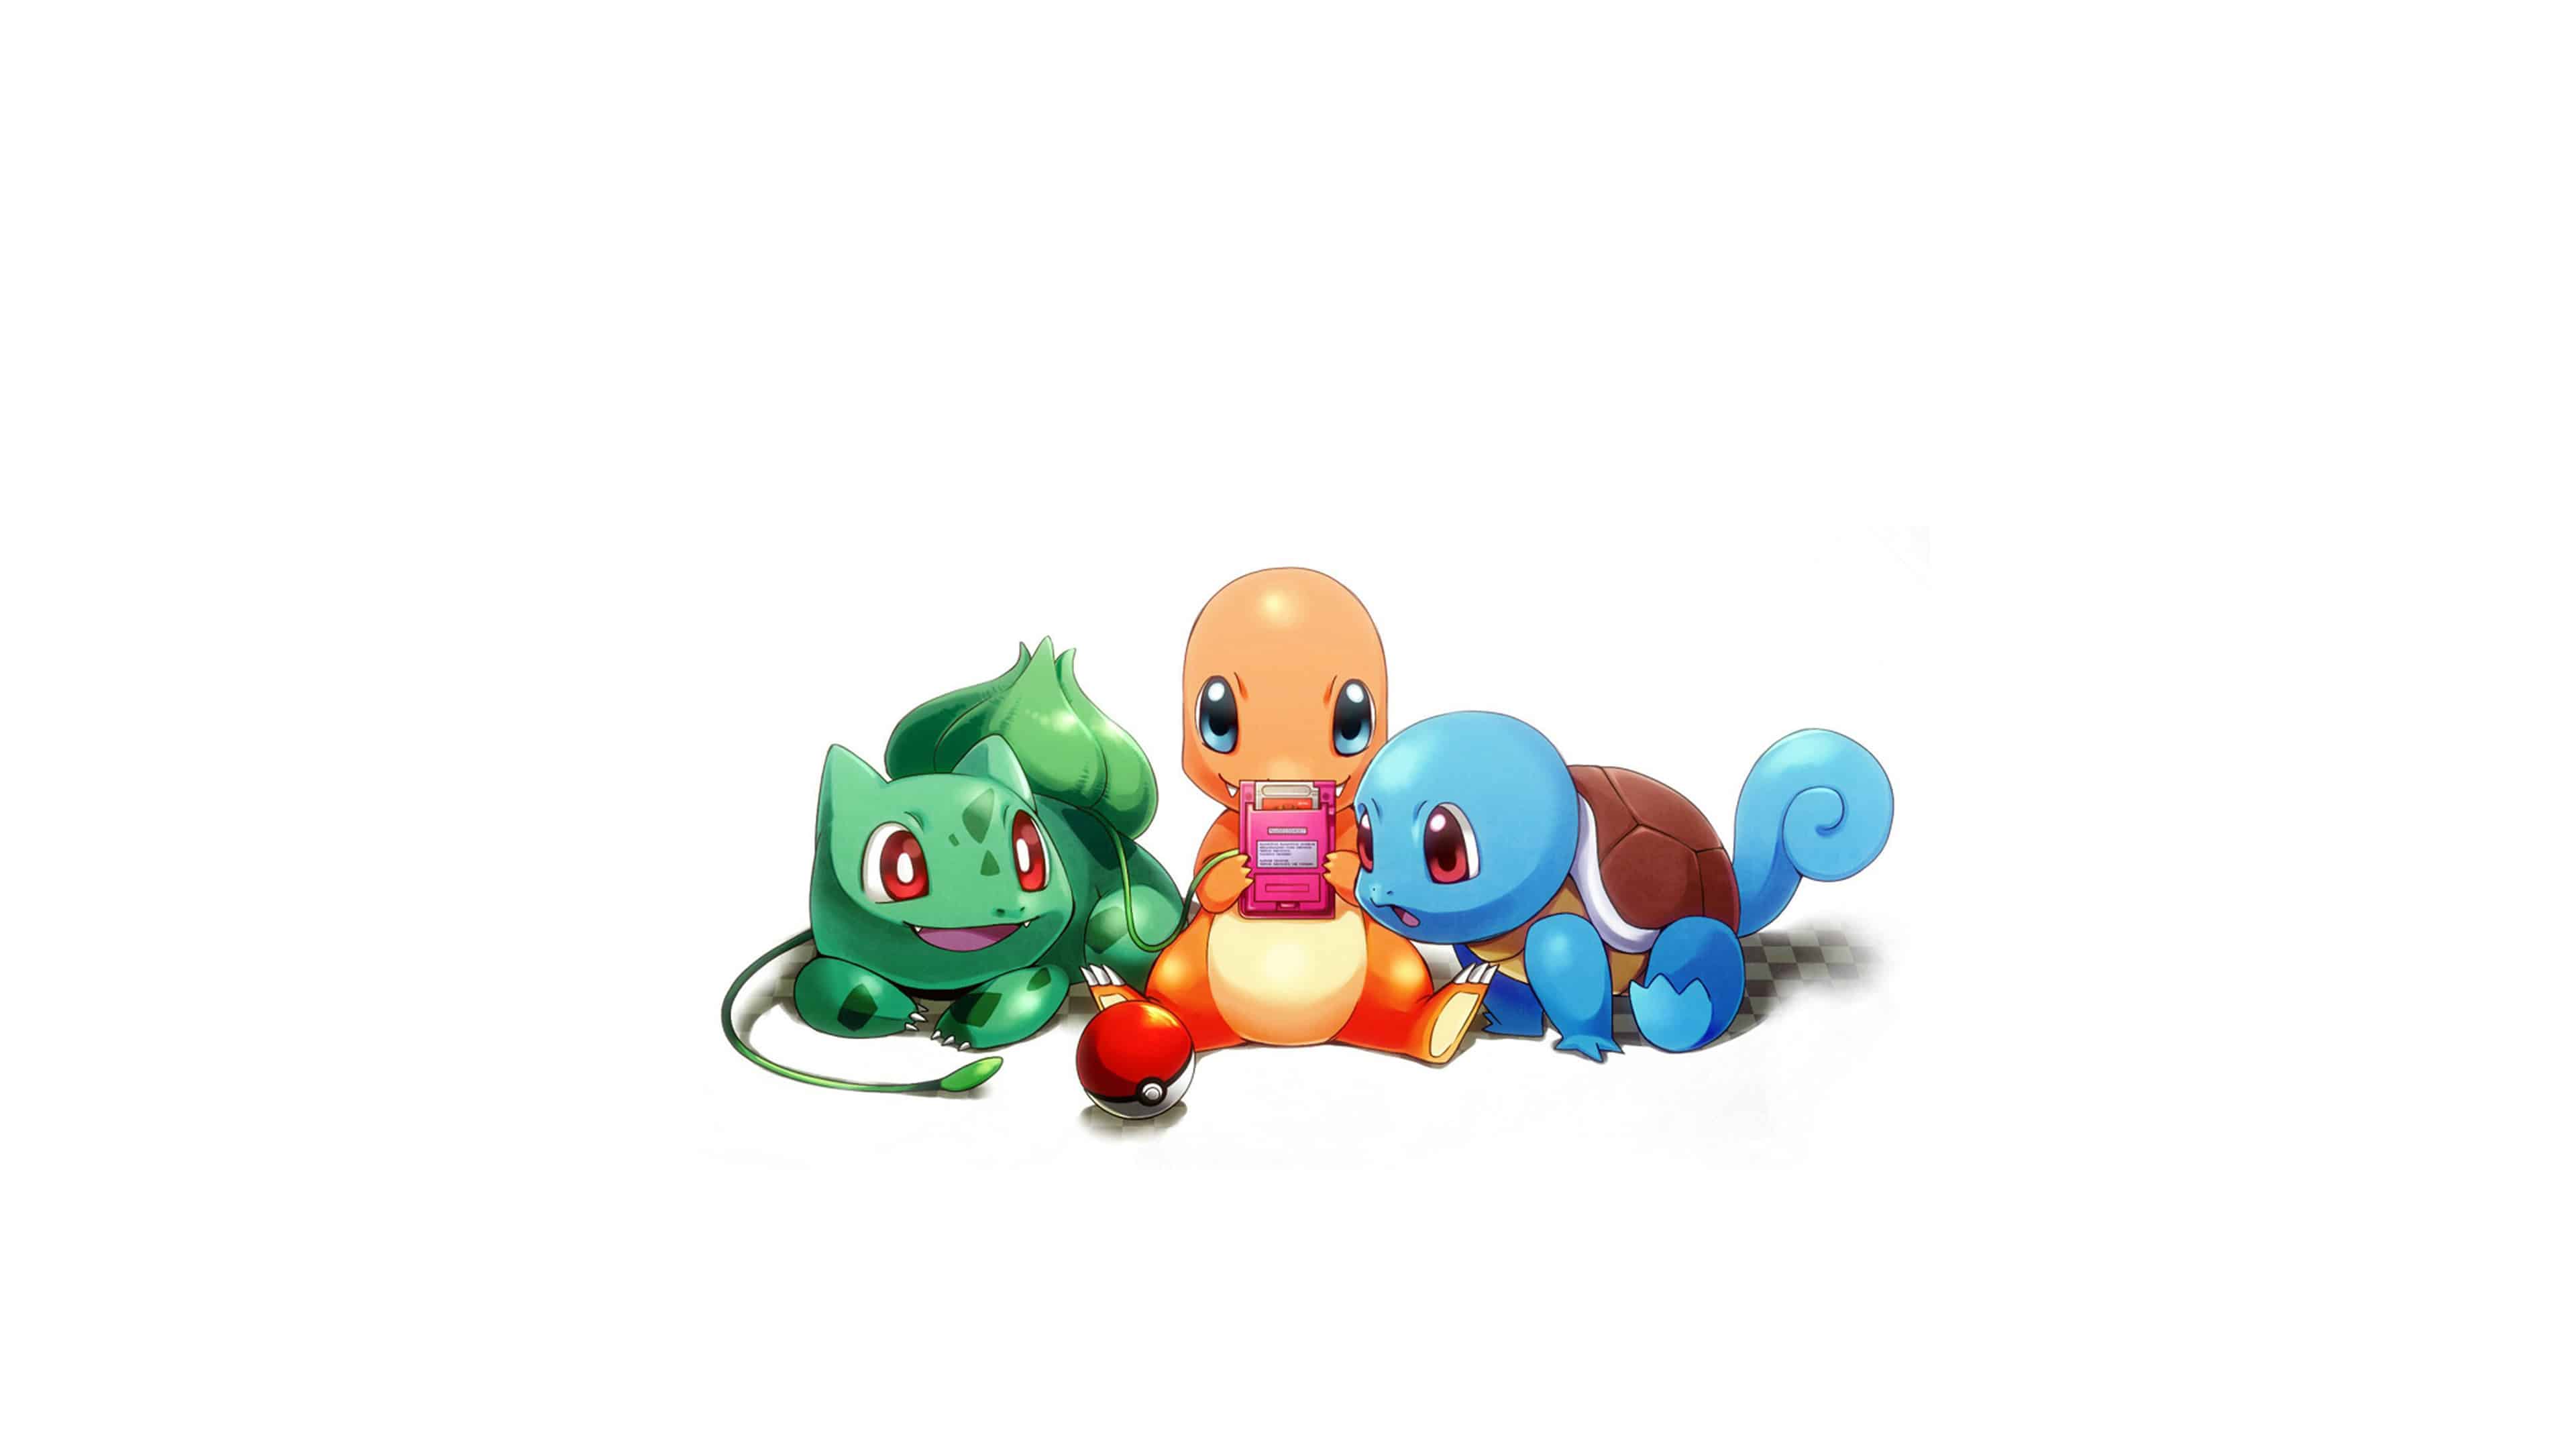 Related Images - Bulbasaur Charmander Squirtle Gameboy , HD Wallpaper & Backgrounds